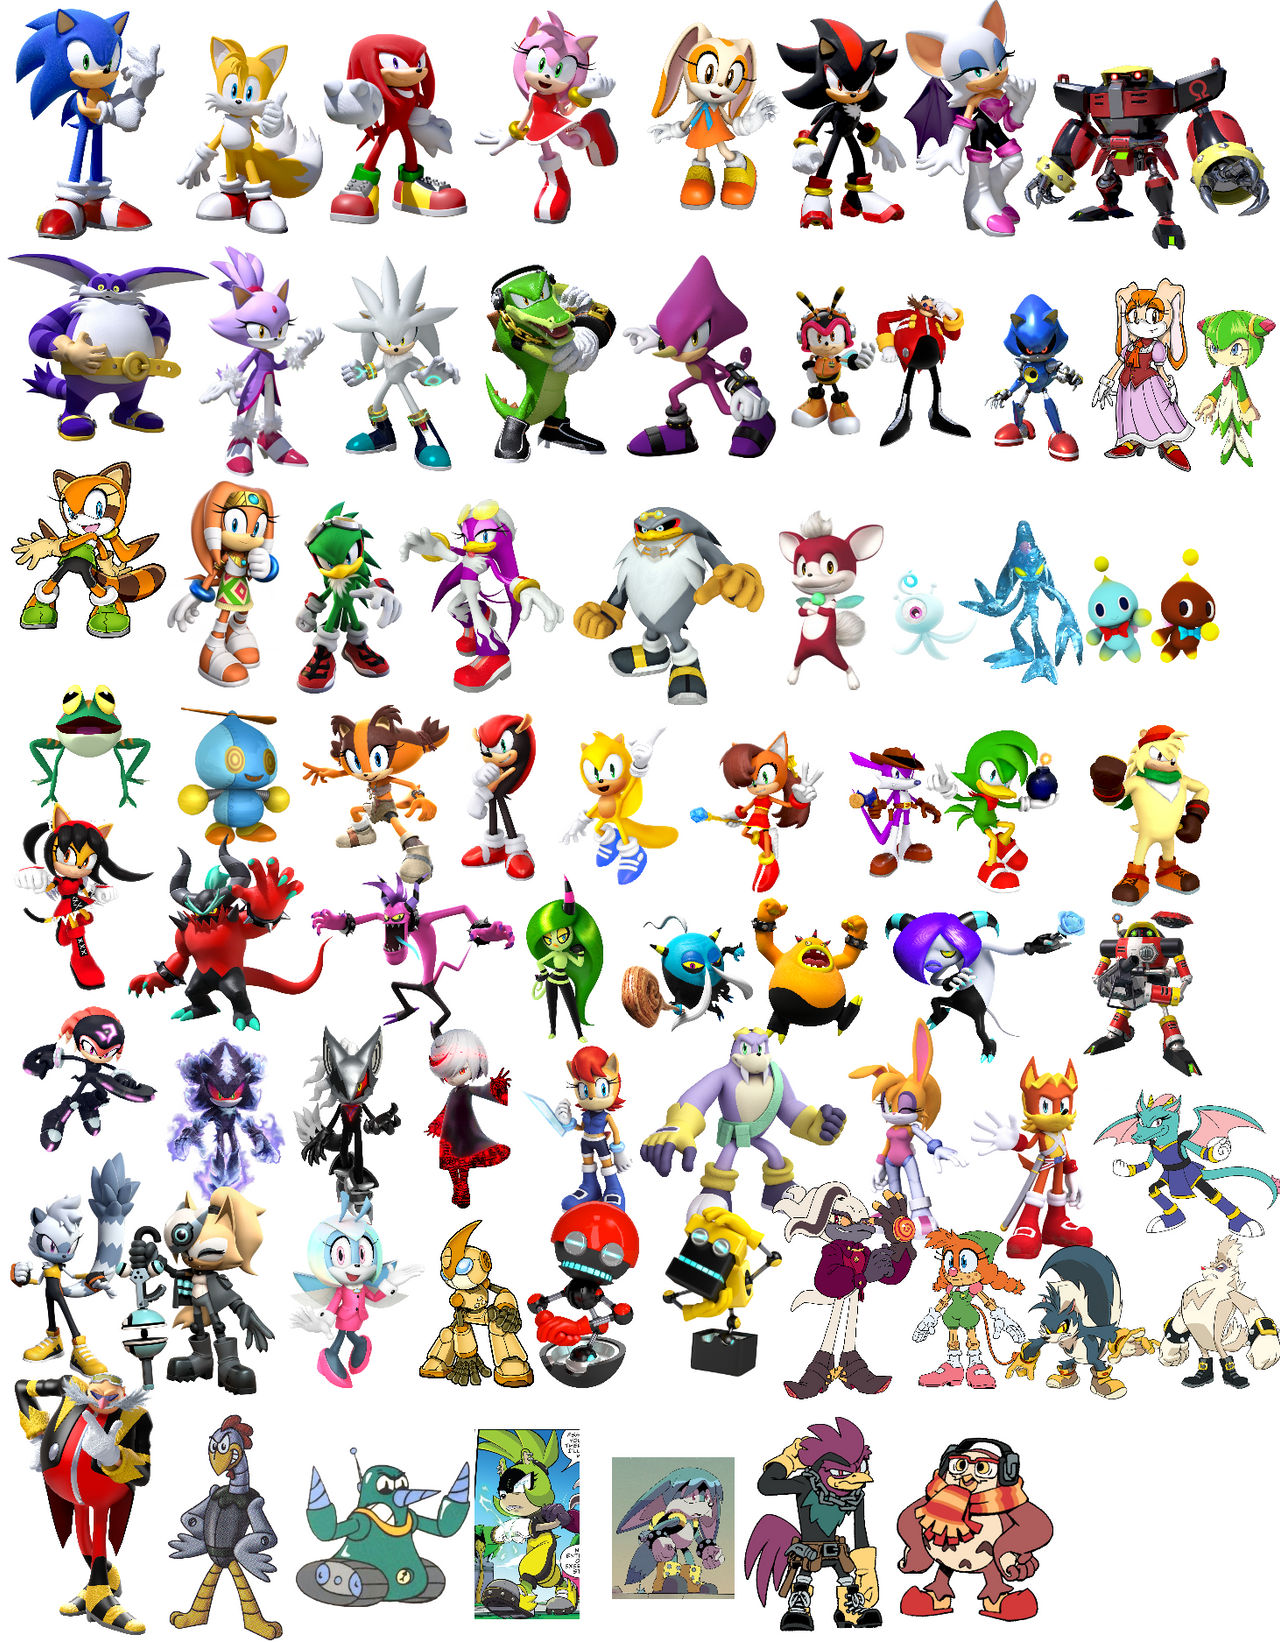 All Mario Characters by Estebanisawesome on DeviantArt